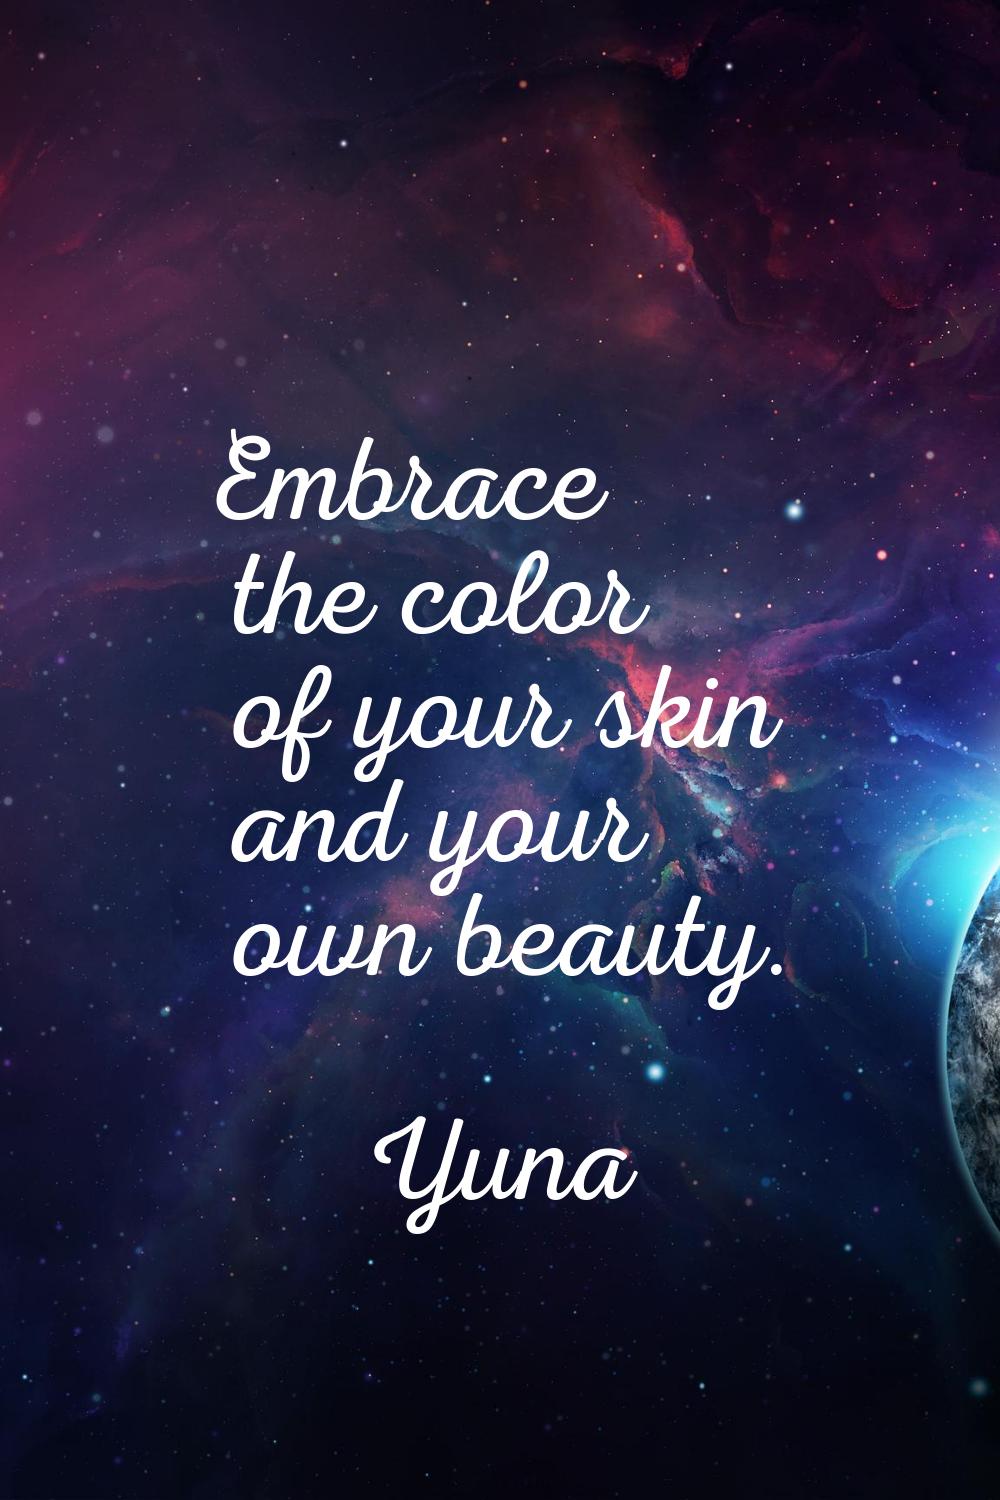 Embrace the color of your skin and your own beauty.